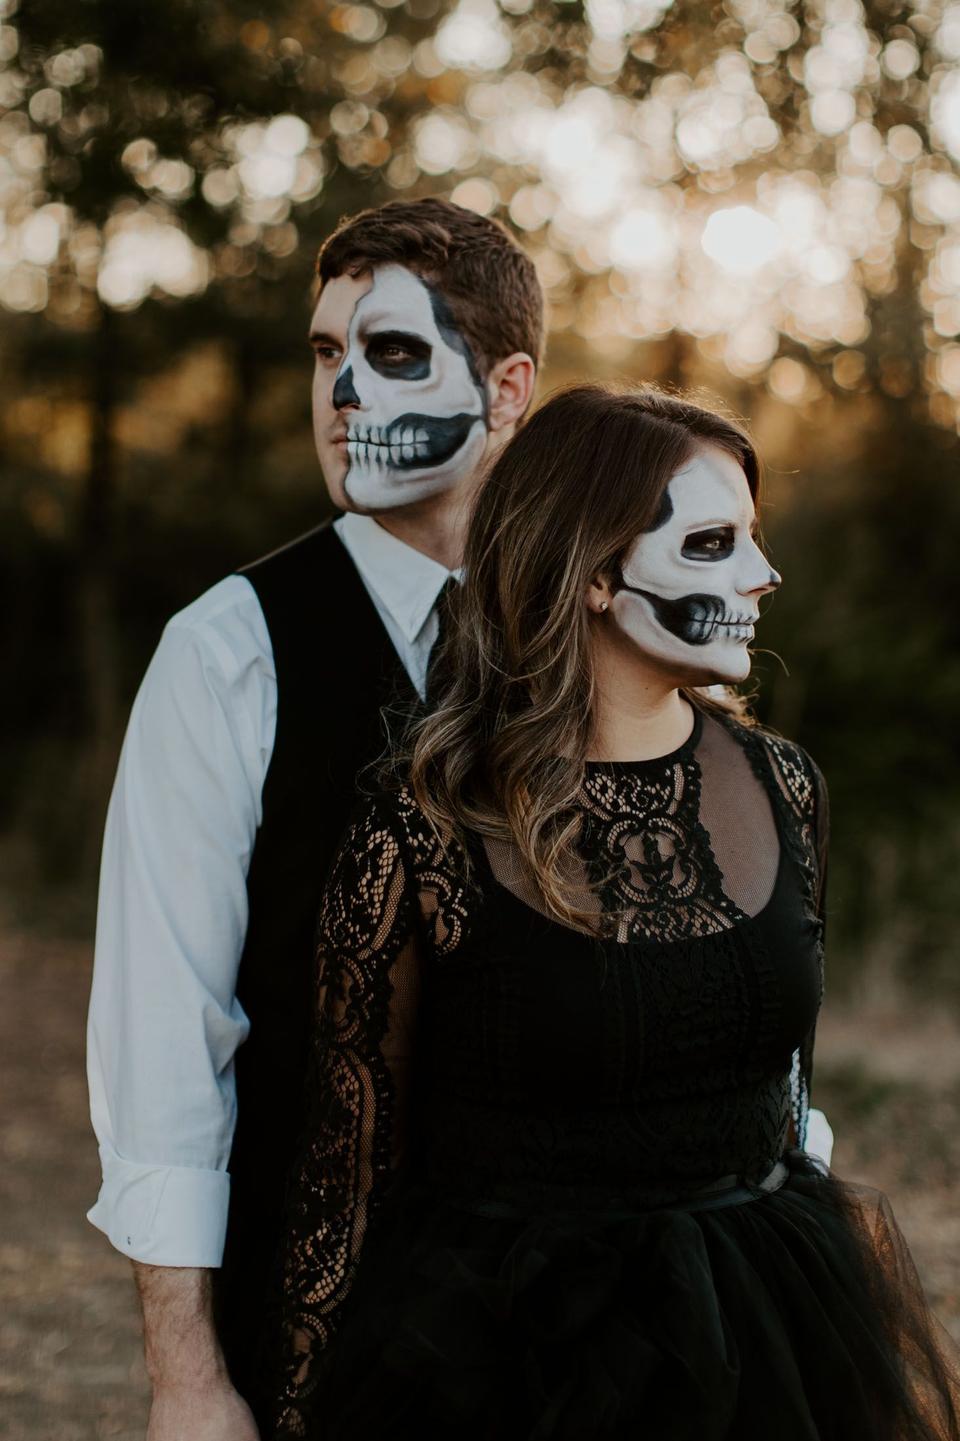 Couples Halloween Costume Ideas: 45 Scary, Sexy and Funny Ideas ...